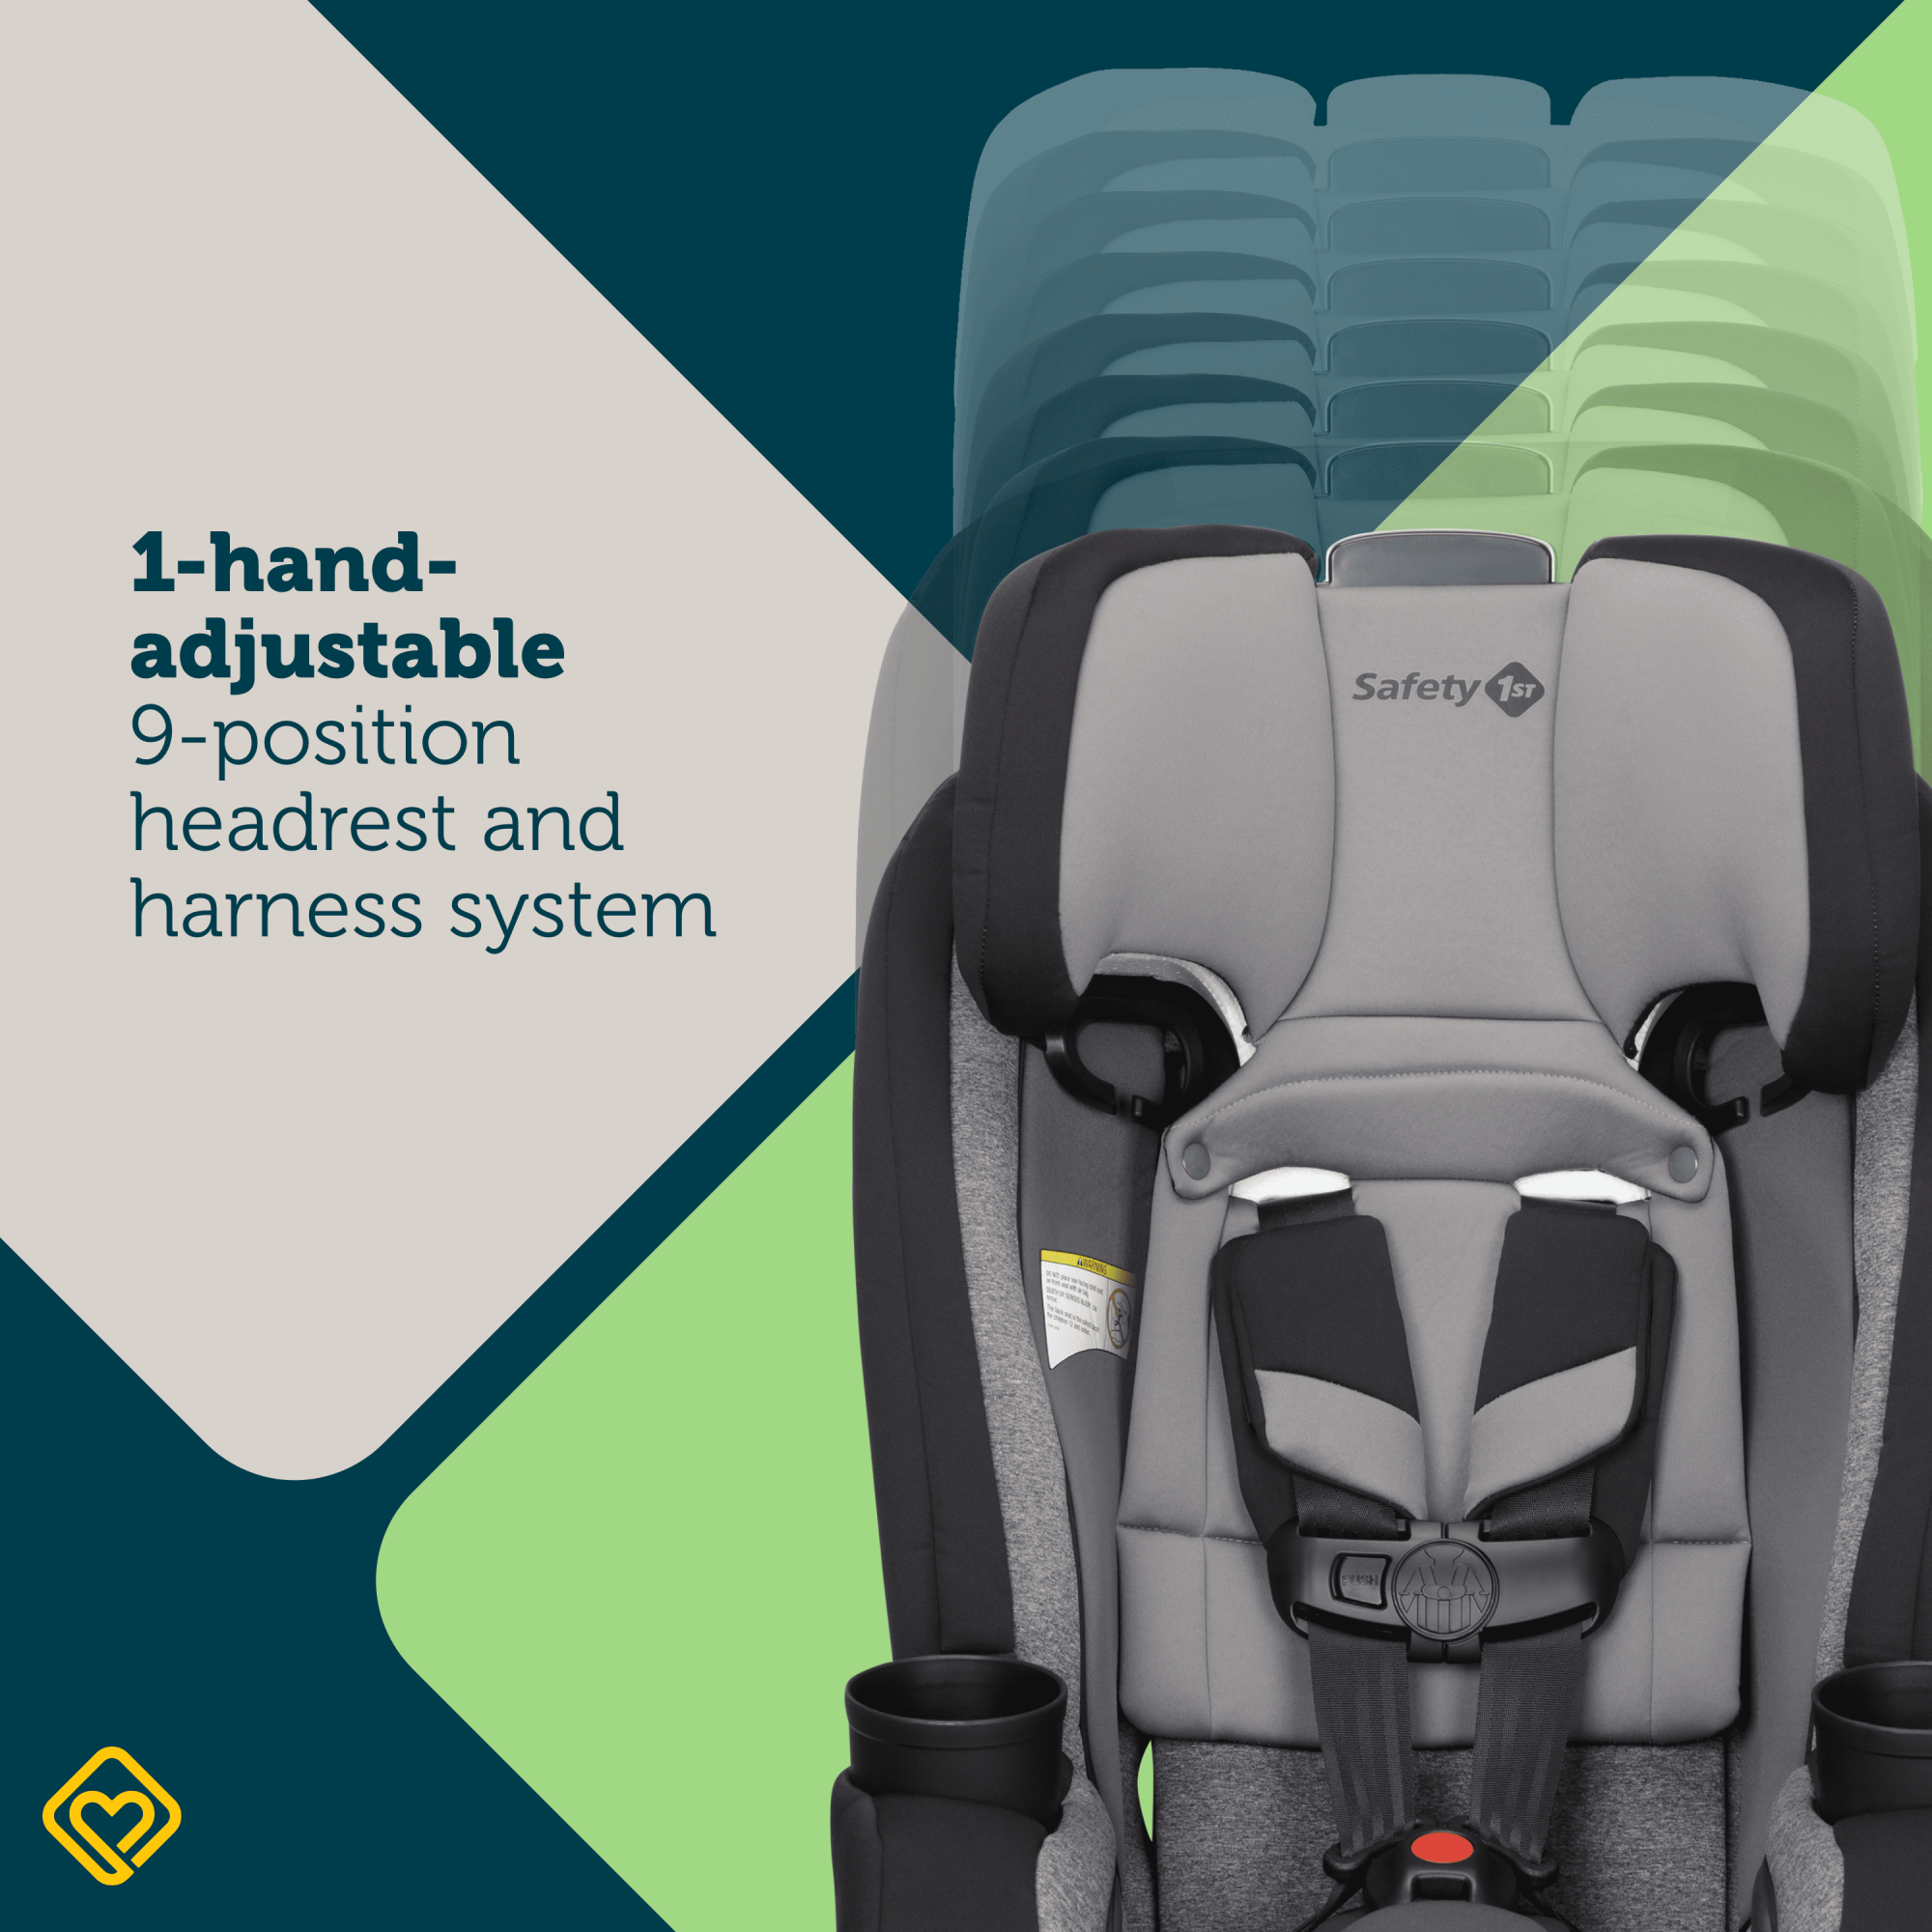 TriMate™ All-in-One Convertible Car Seat - soft and comfortable infant inserts